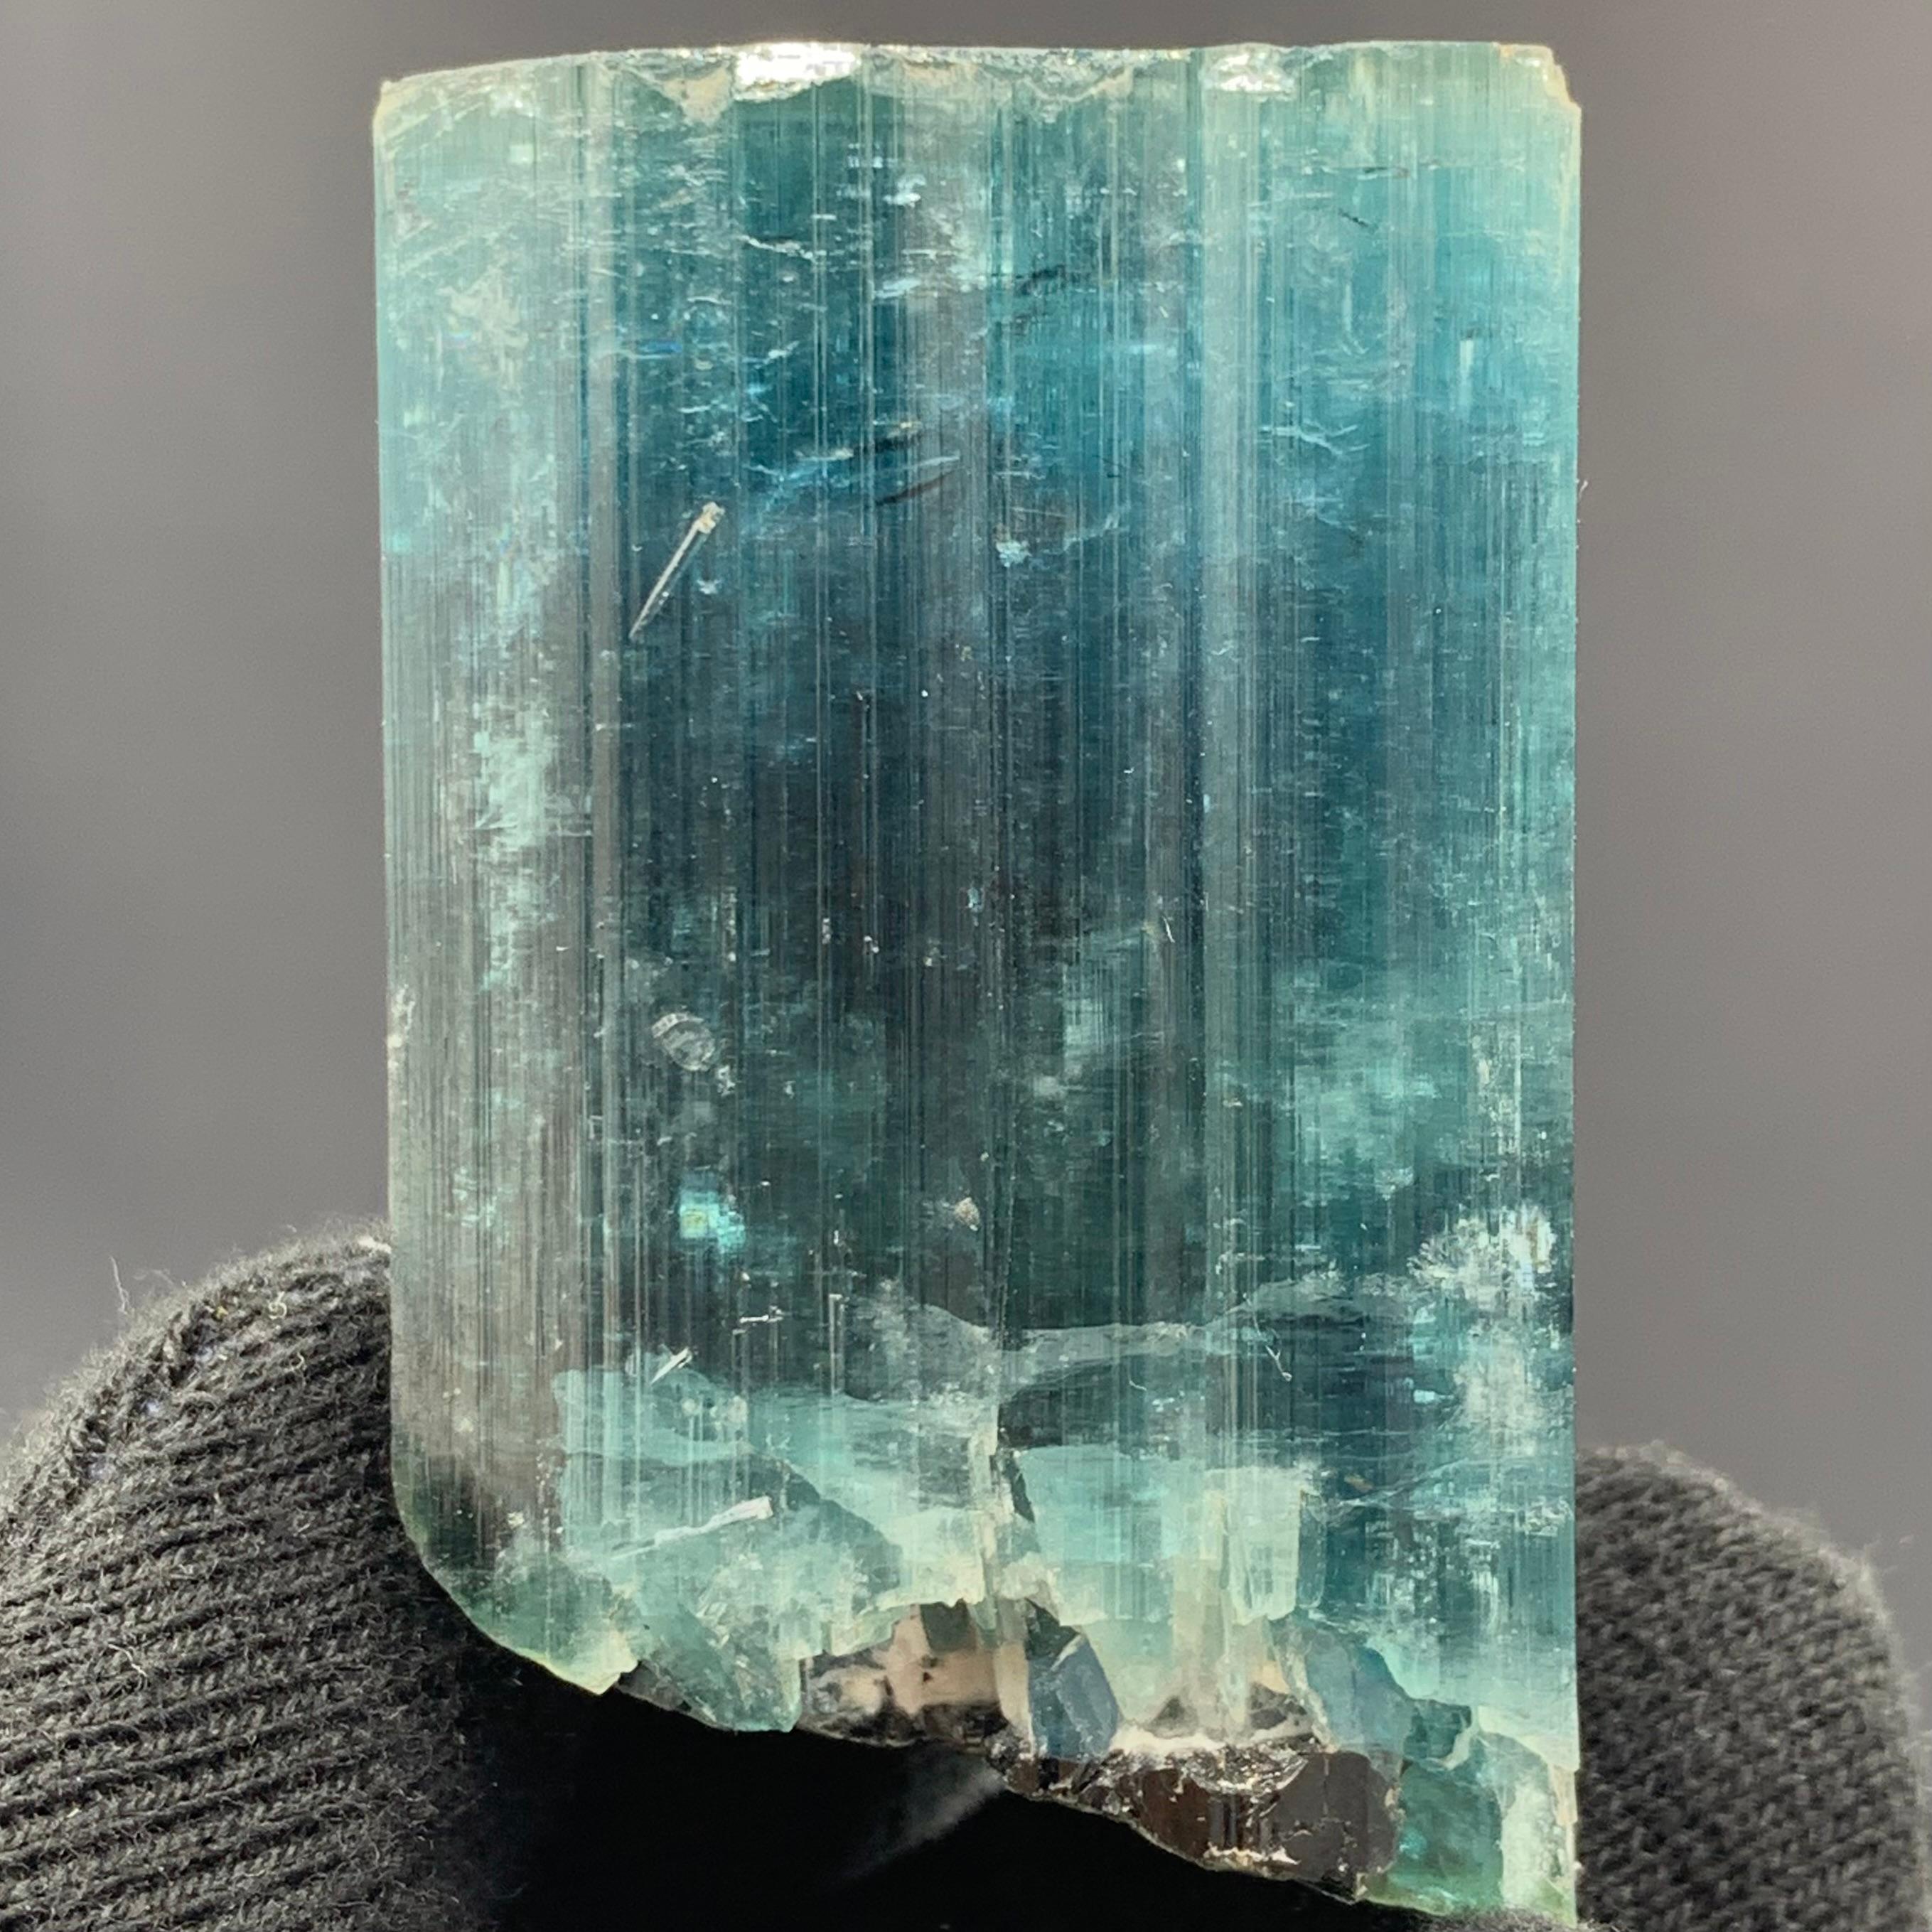 91.22 Beautiful Indicolite Tourmaline Crystal From Kunar, Afghanistan 

Weight: 91.22 Gram 
Dimension: 5 x 3.2 x 3.1 Cm
Origin: Kunar, Afghanistan 

Tourmaline is a crystalline silicate mineral group in which boron is compounded with elements such